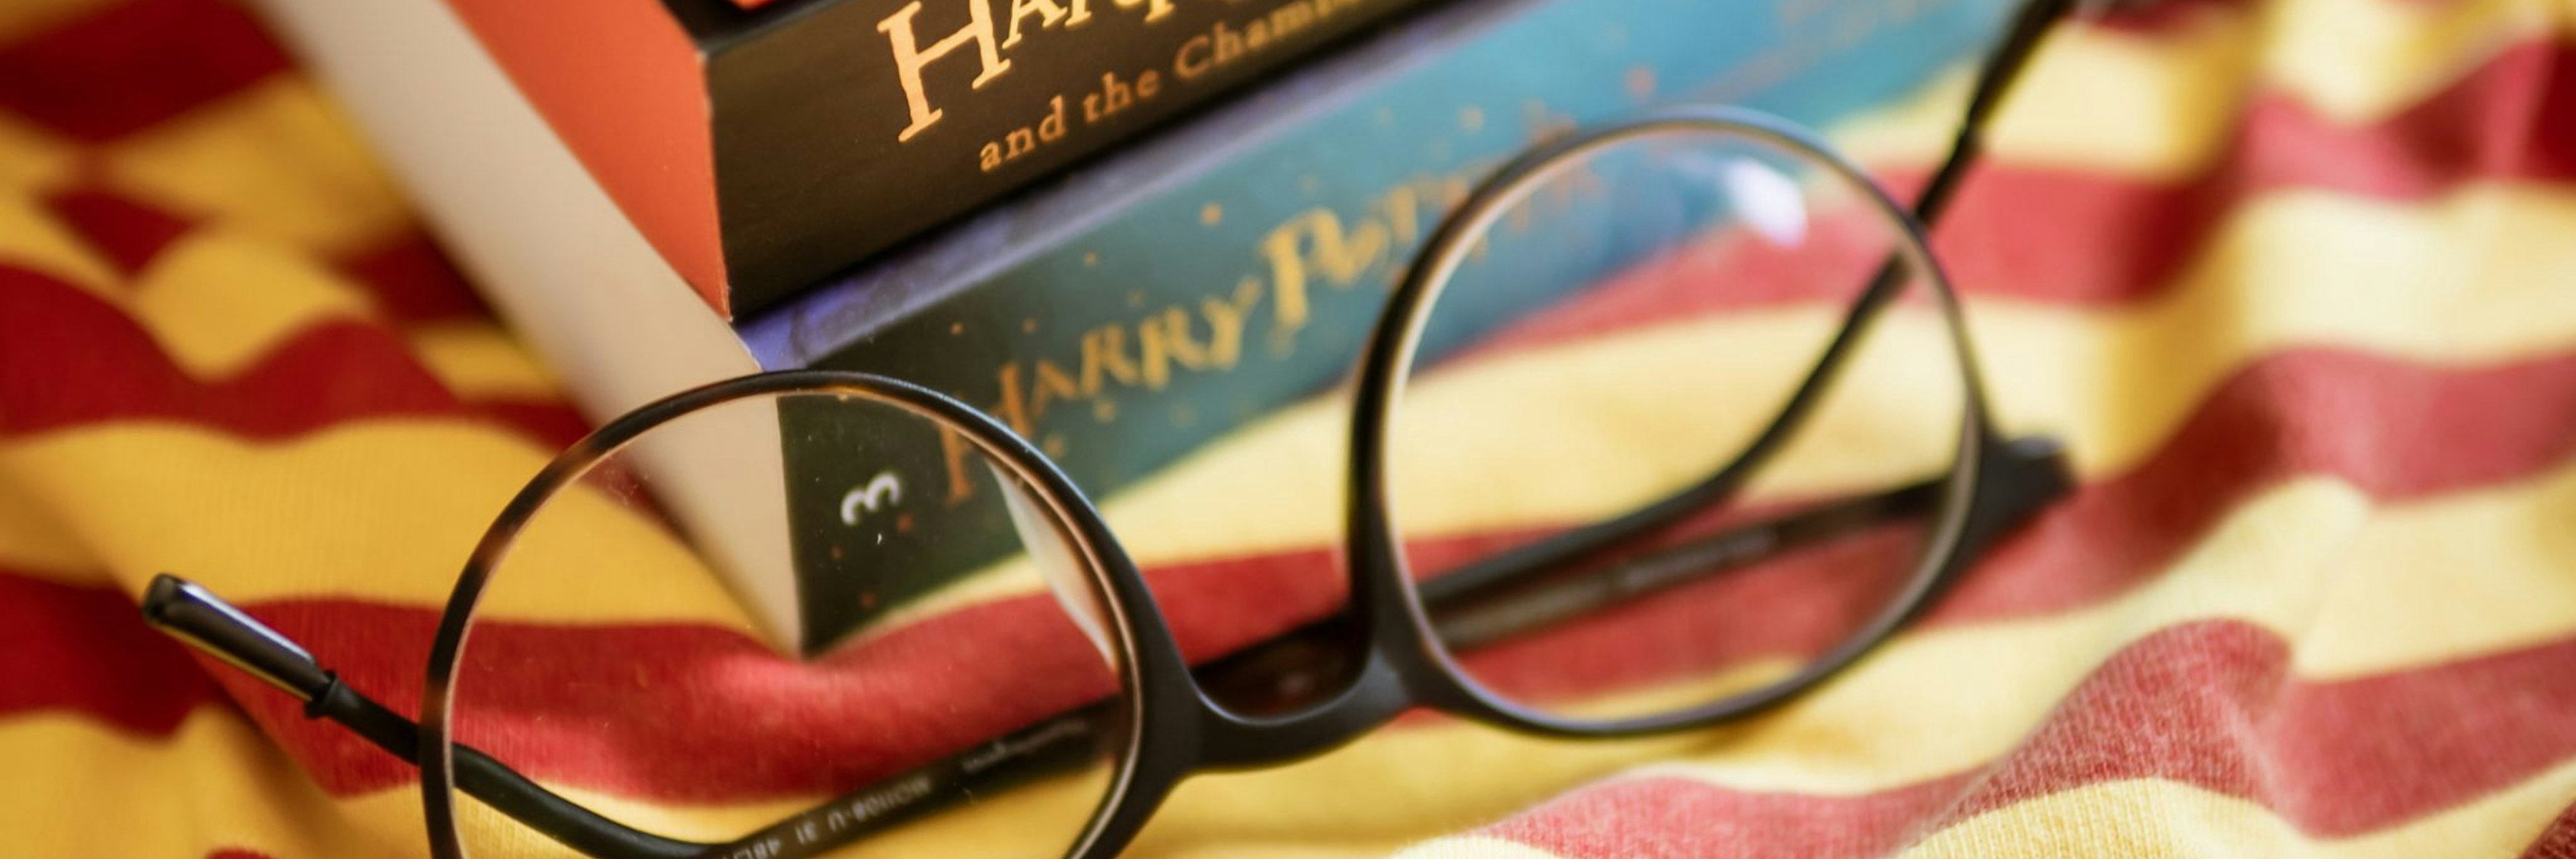 A stack of harry potter books on a red and yellow striped cloth with a pair of round glasses